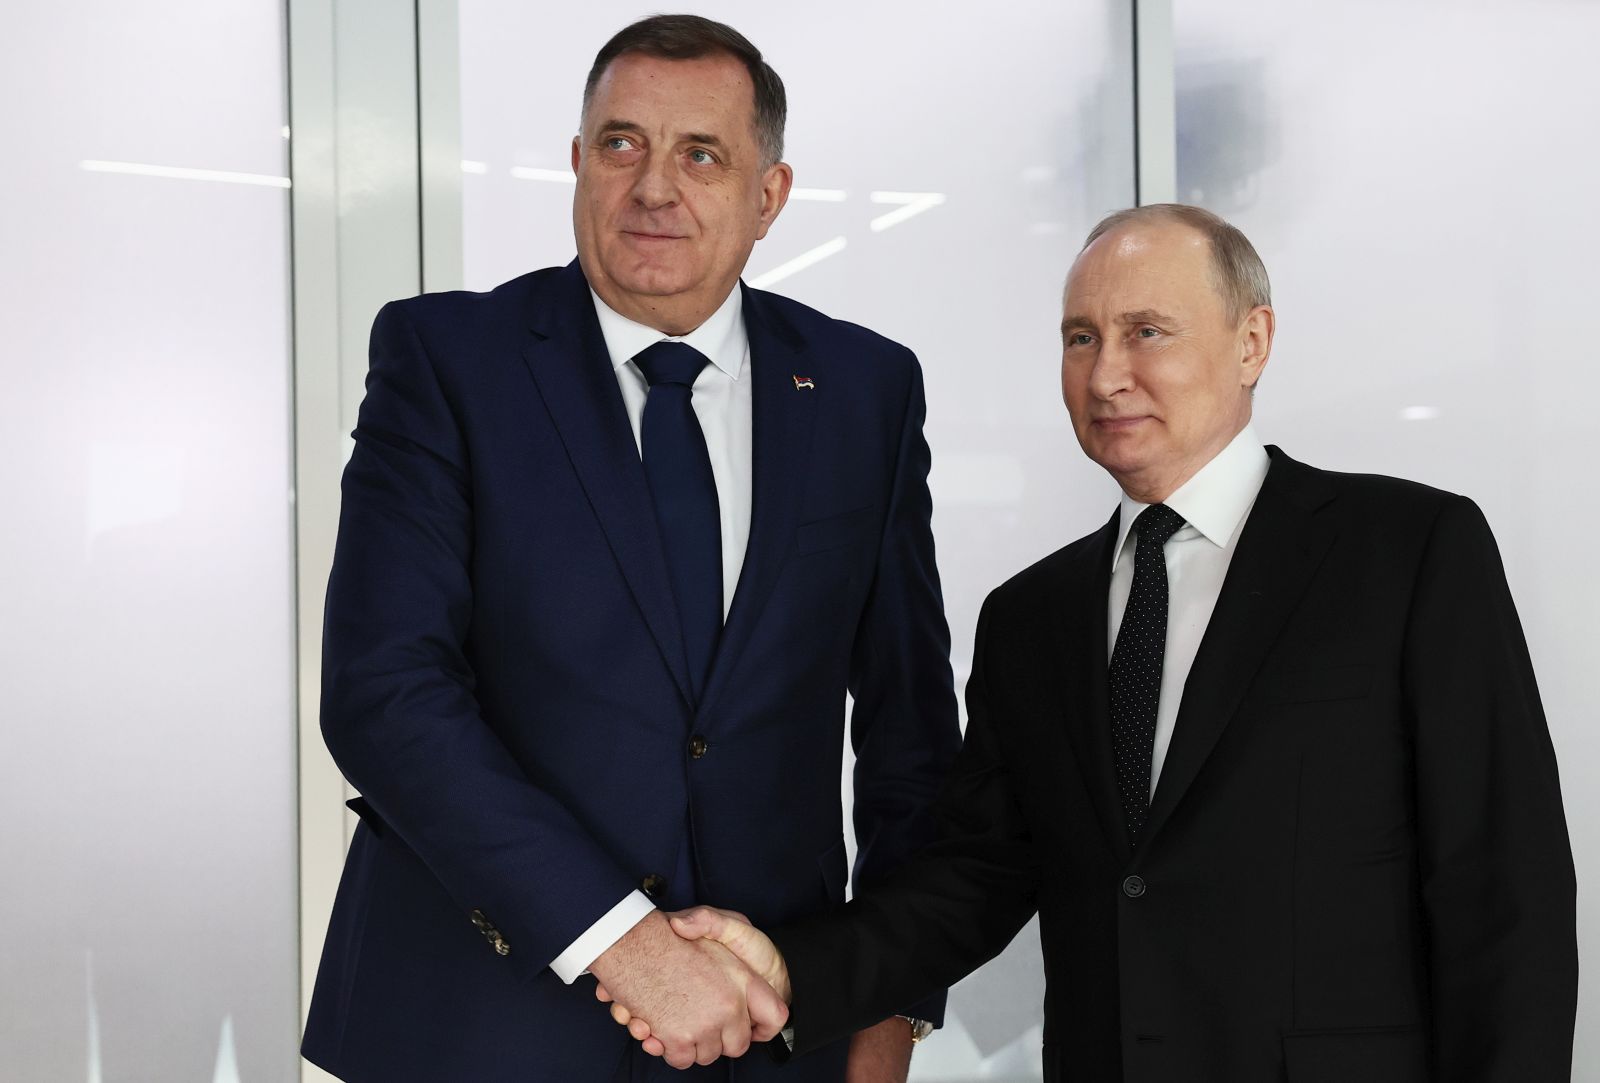 epa11170200 Russian President Vladimir Putin (R) and President of Republika Srpska (Serb Republic) Milorad Dodik shake hands as they attend a meeting at the Kazan Expo international exhibition centre in Kazan, Republic of Tatarstan, Russia, 21 February 2024. Vladimir Putin and Milorad Dodik arrived to Kazan attend opening ceremony of the Games of the Future. The phygital concept competition, the Games of the Future Kazan 2024, will be held in 21 innovative disciplines, each of which combines classic sports and e-sports, from 21 February to 03 March 2024.  EPA/SERGEI BOBYLEV/SPUTNIK/KREMLIN POOL / POOL MANDATORY CREDIT